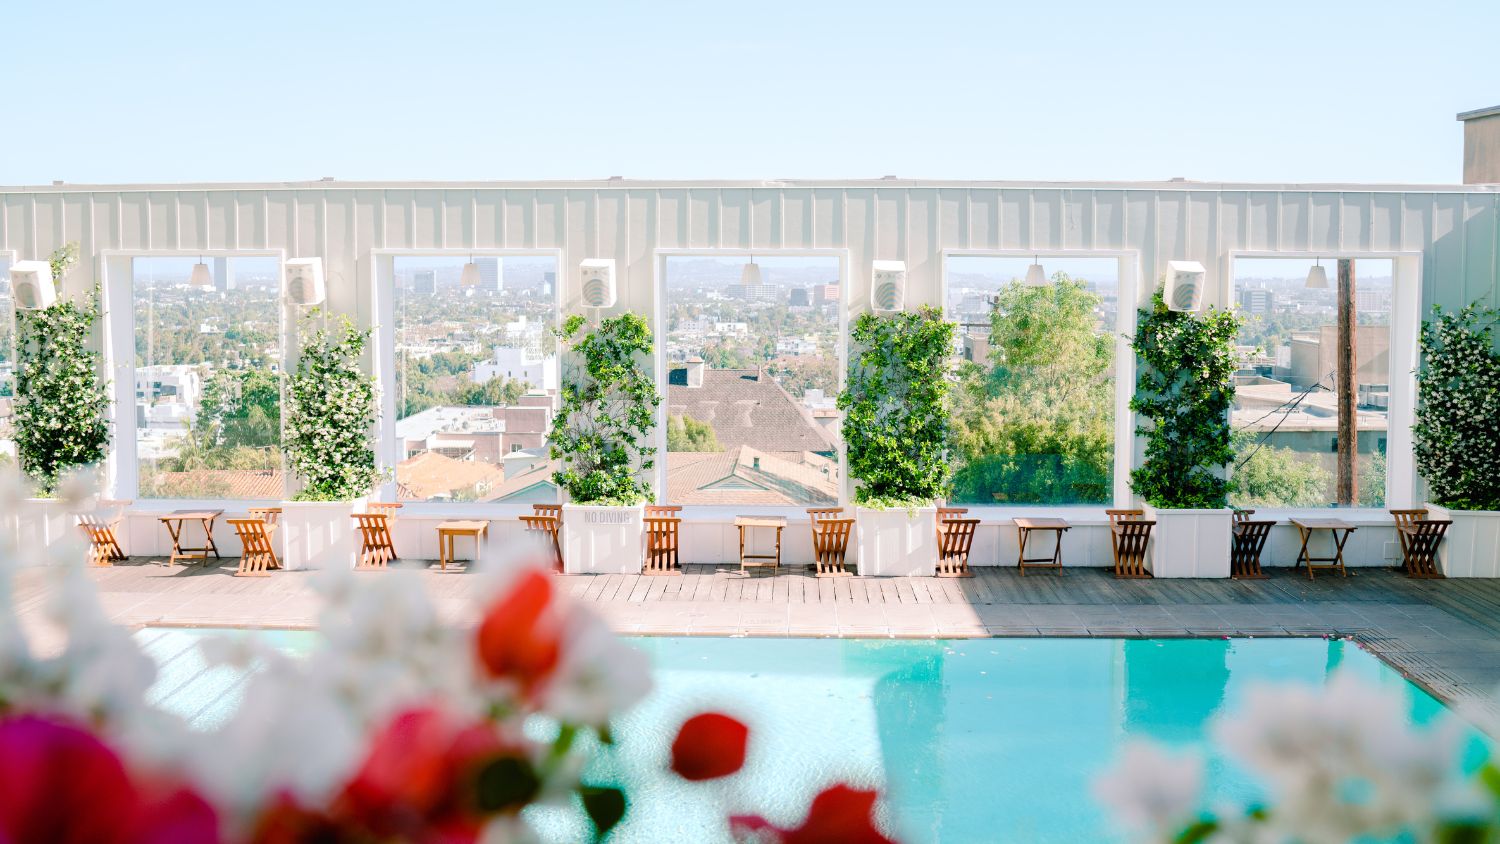 How to Explore West Hollywood in Style